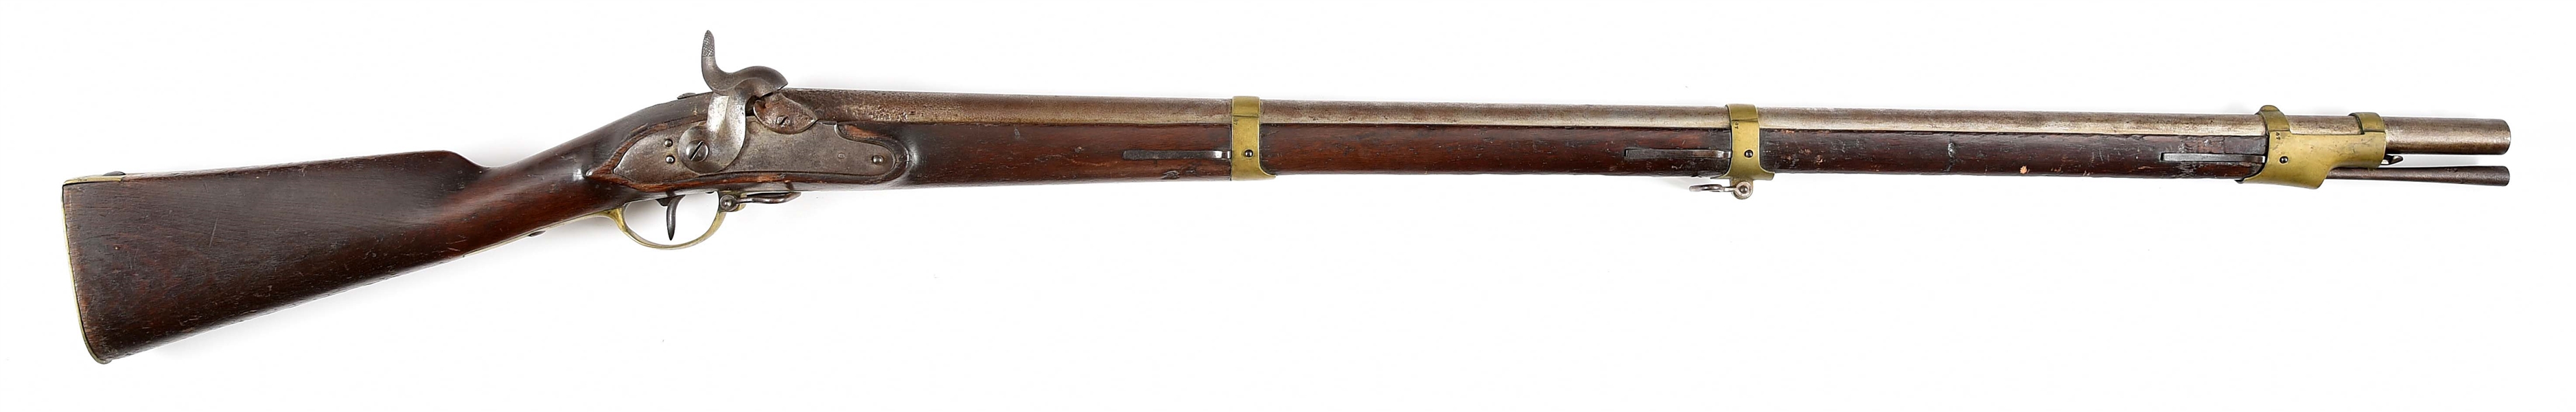 (A) POTSDAM PERCUSSION SMOOTHBORE MUSKET.